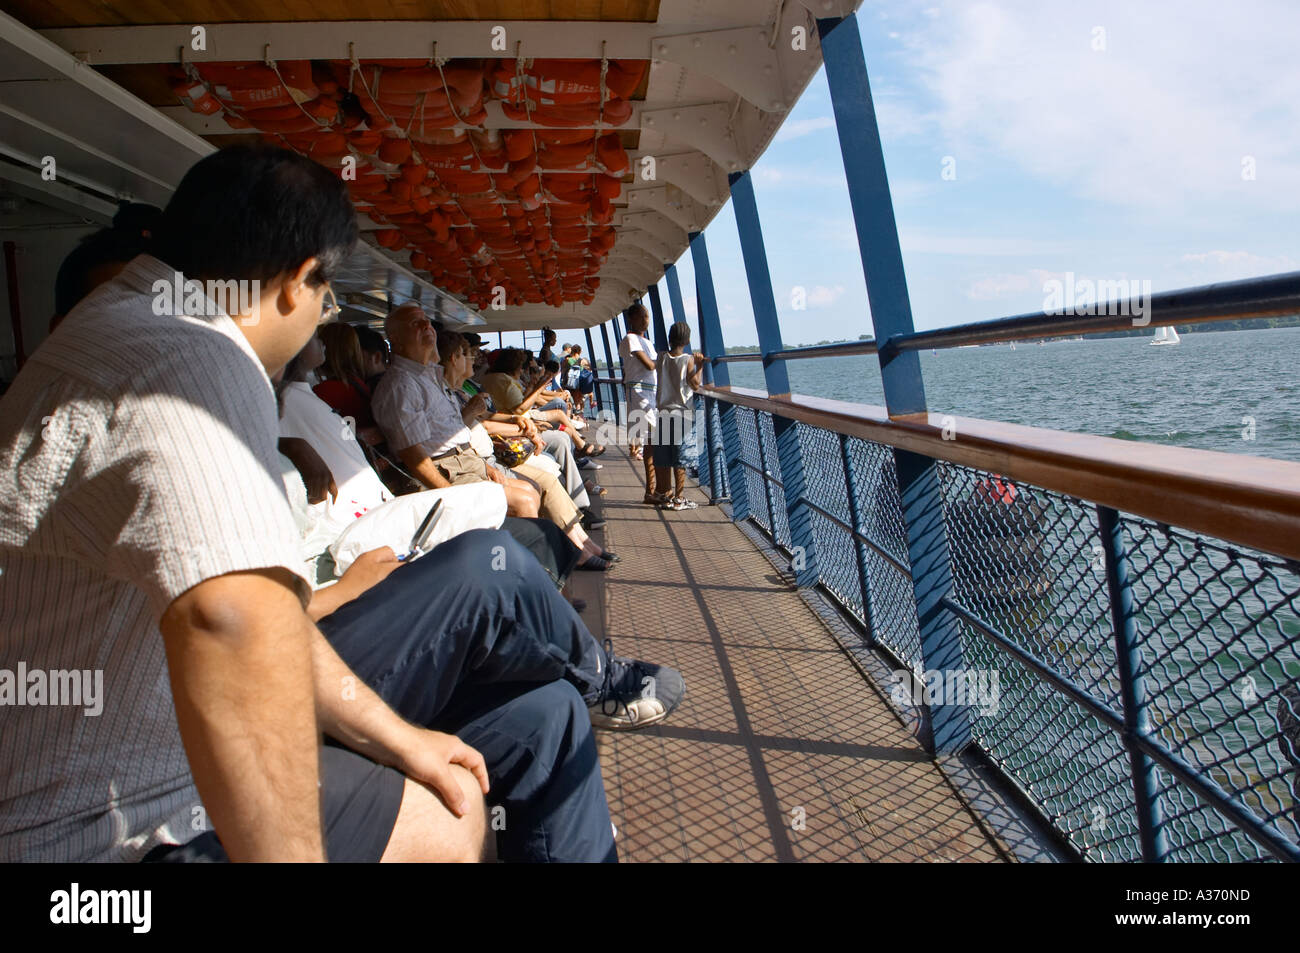 View of the interior and passengers of the Toronto Islands ferry. Stock Photo